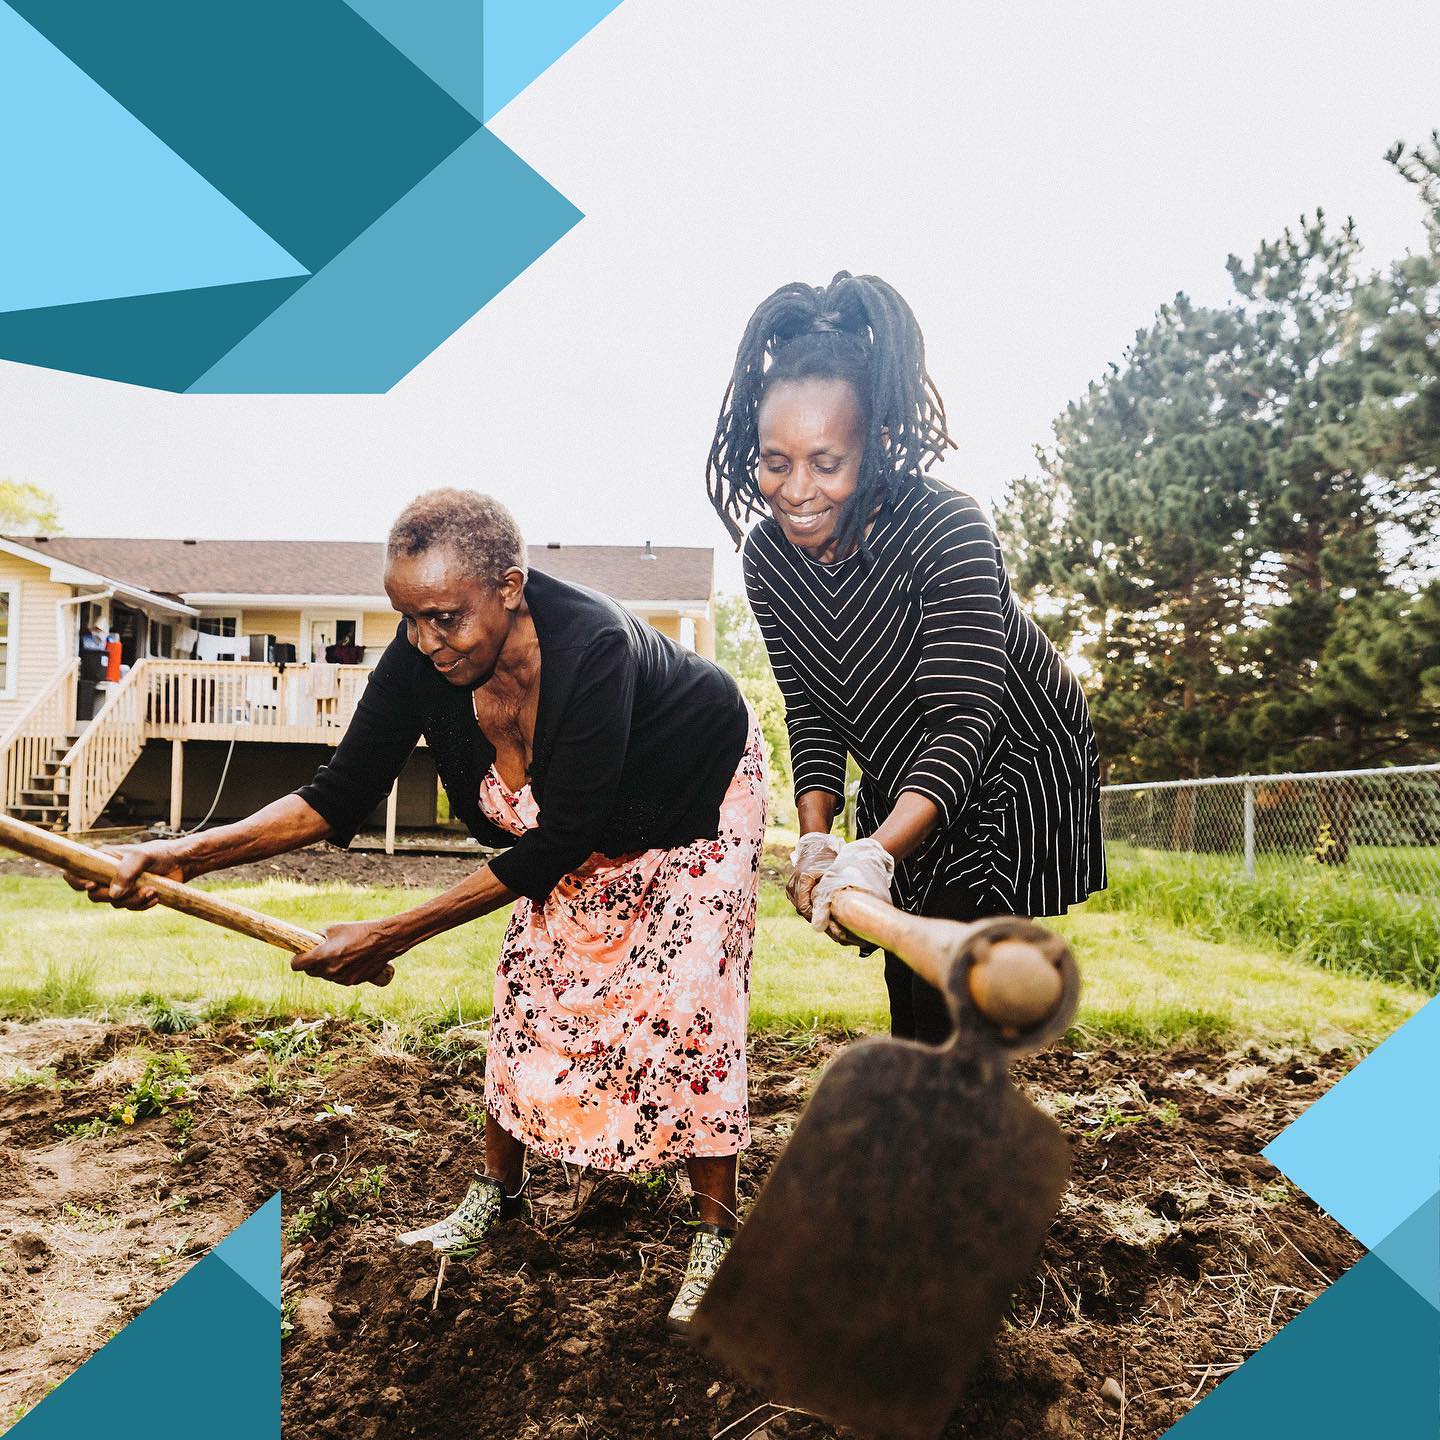 In honor of #mentalhealthawarenessmonth , we want to give you another reason to get outside and do some gardening. According to a scientific study, digging in the dirt really does lift your spirits. The digging stirs up microbes in the soil. Inhaling these microbes can stimulate serotonin production, which can make you feel relaxed and happier.A number of scientific studies on the effects of gardening, sometimes called horticultural therapy, have reported health outcomes including improved mental health. So if you are looking for ways to relax and find some simple joy while taking care of Minnesota, roll up your sleeves and get your hands dirty. Literally.#mnupstream #lovingwherewelive #mentalhealthawareness #minnesota #explorepage #exploremn — from Instagram